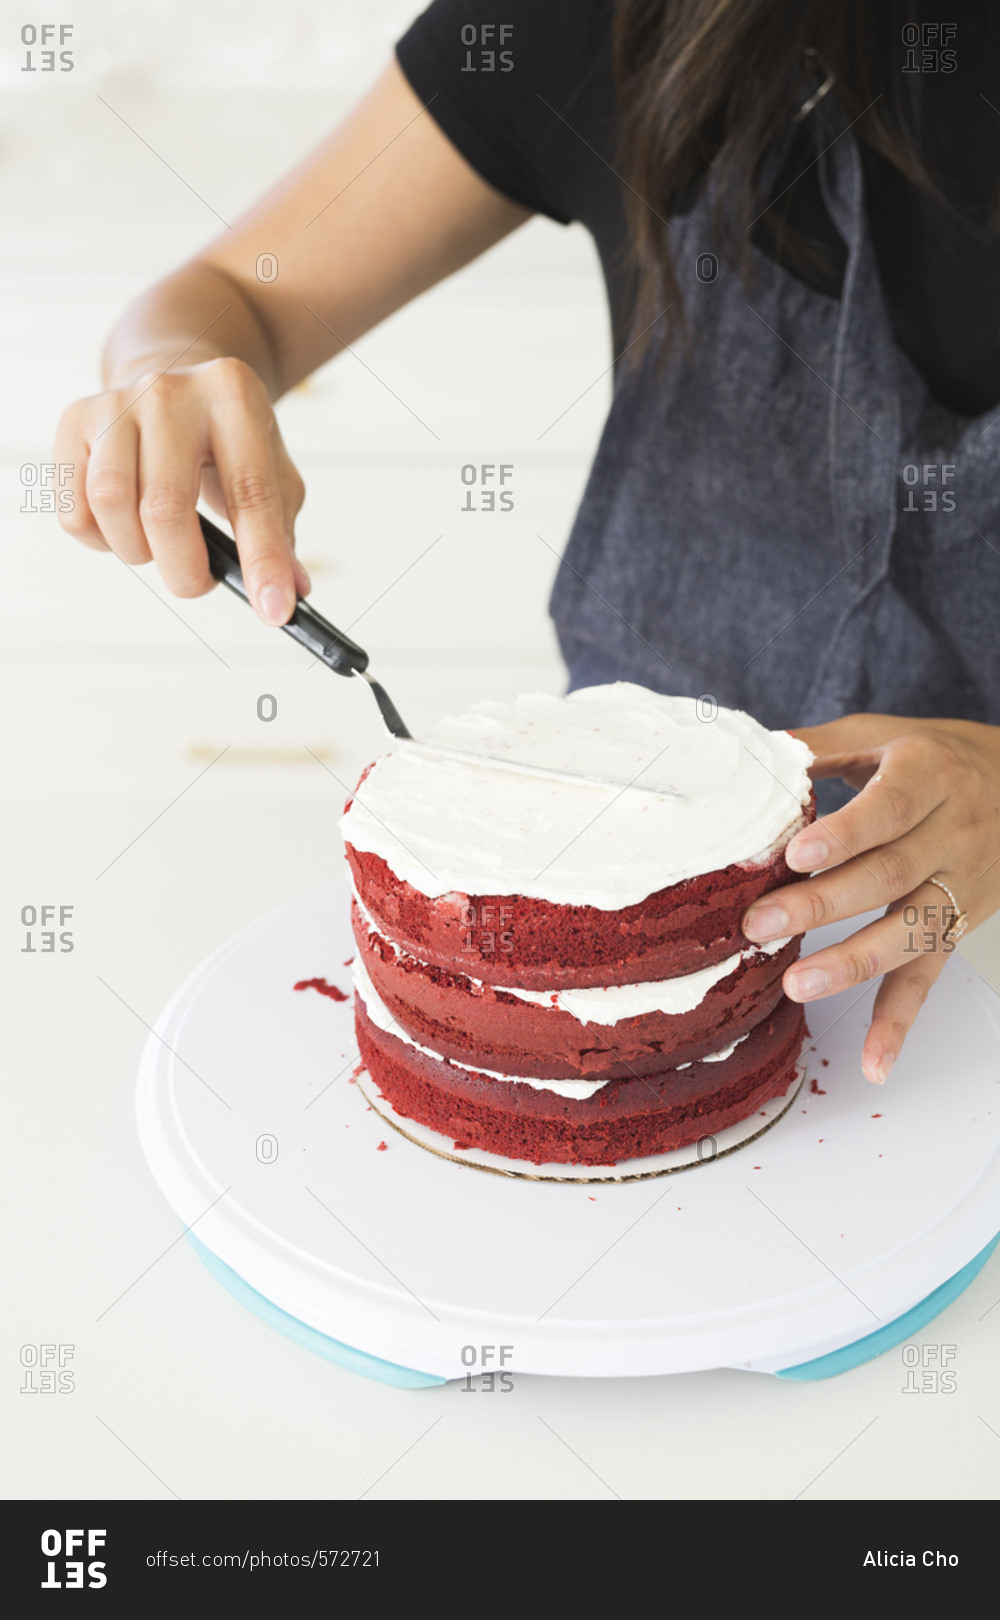 Baker frosting a red velvet cake with white icing